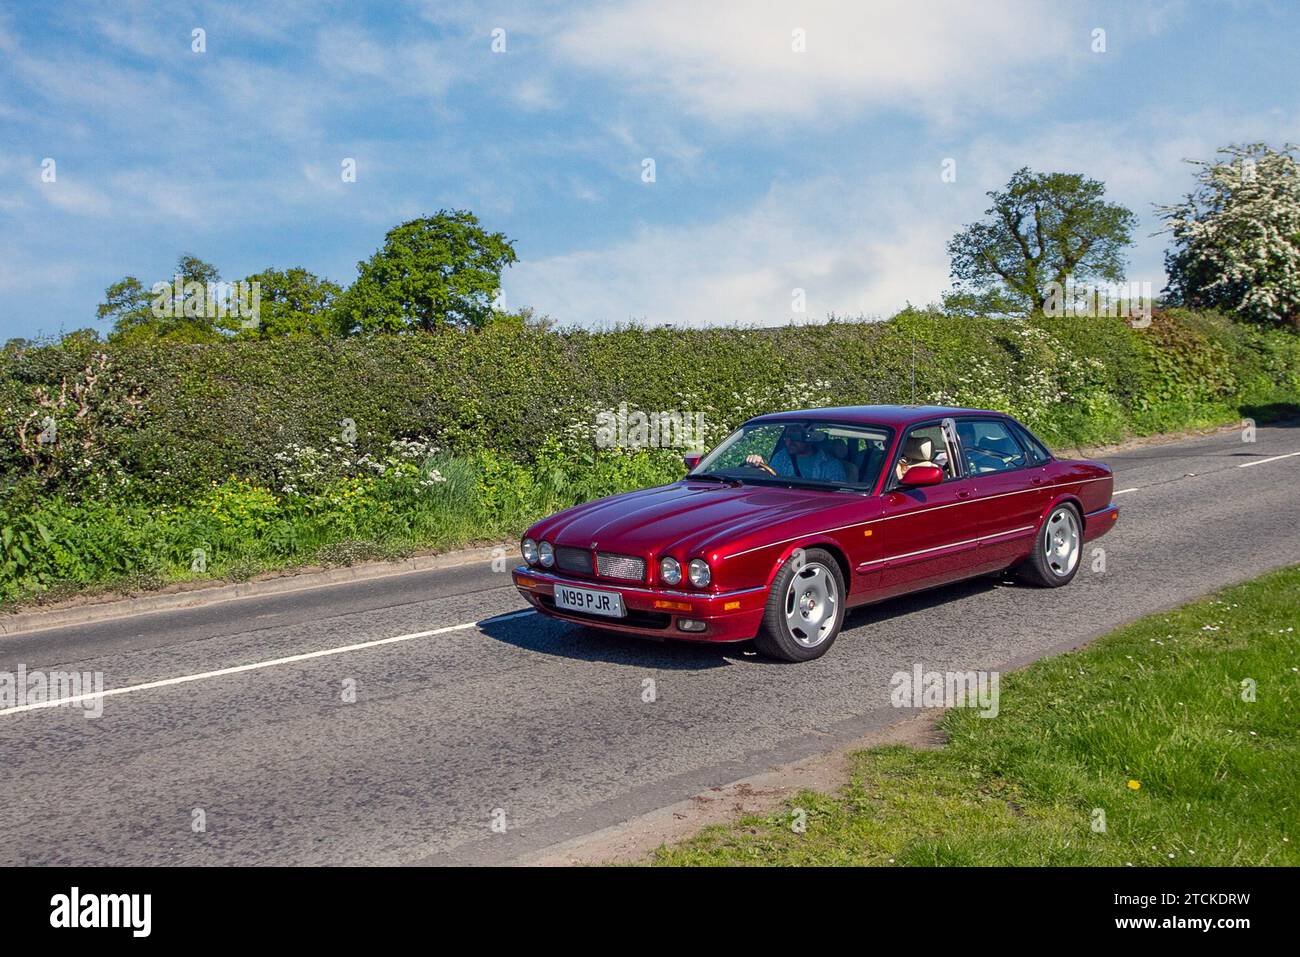 1996 90s nineties Jaguar Xjr Auto V6 S/C SWB Auto Red Car executive Saloon Petrol 3980 cc; Vintage, restored classic motors, automobile collectors motoring enthusiasts, historic veteran cars travelling in Cheshire, UK Stock Photo